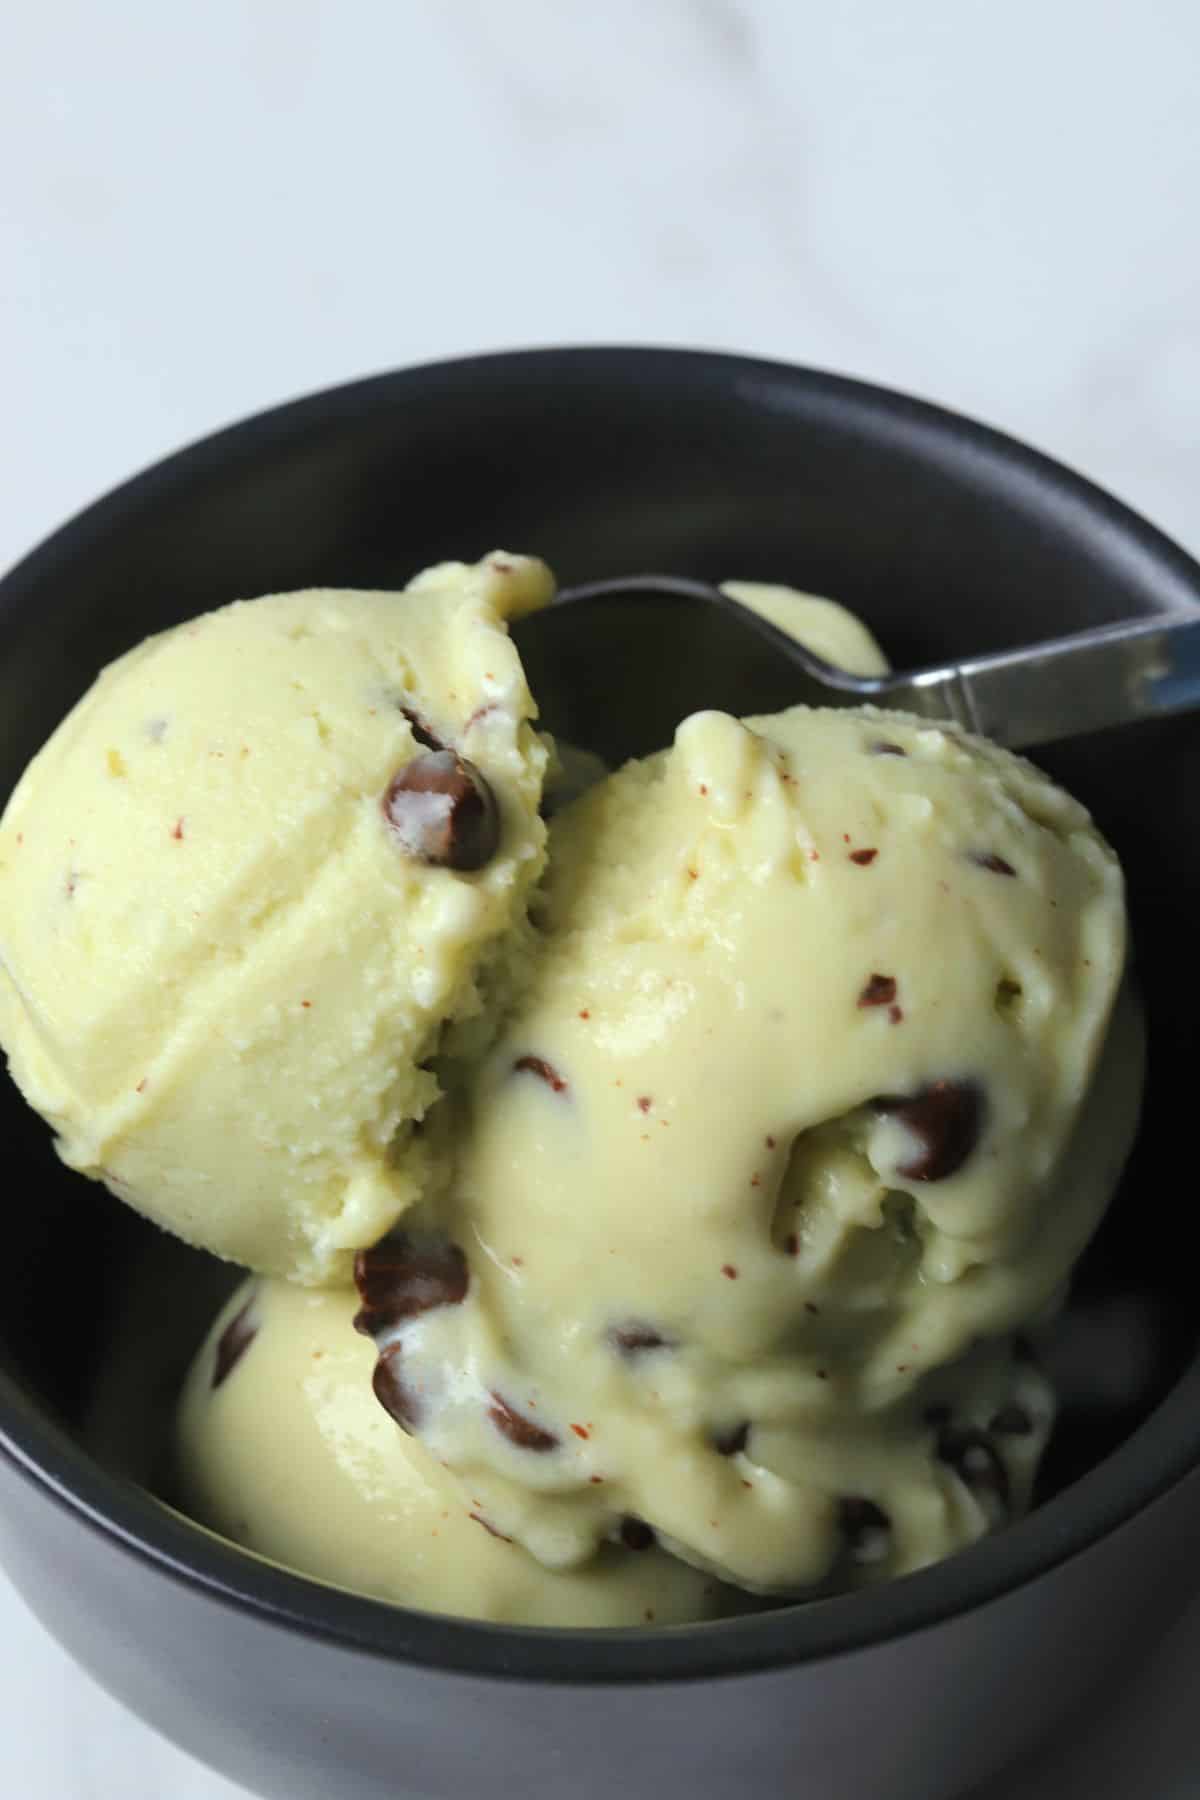 Black bowl with scoops of sugar free mint chocolate chip ice cream.